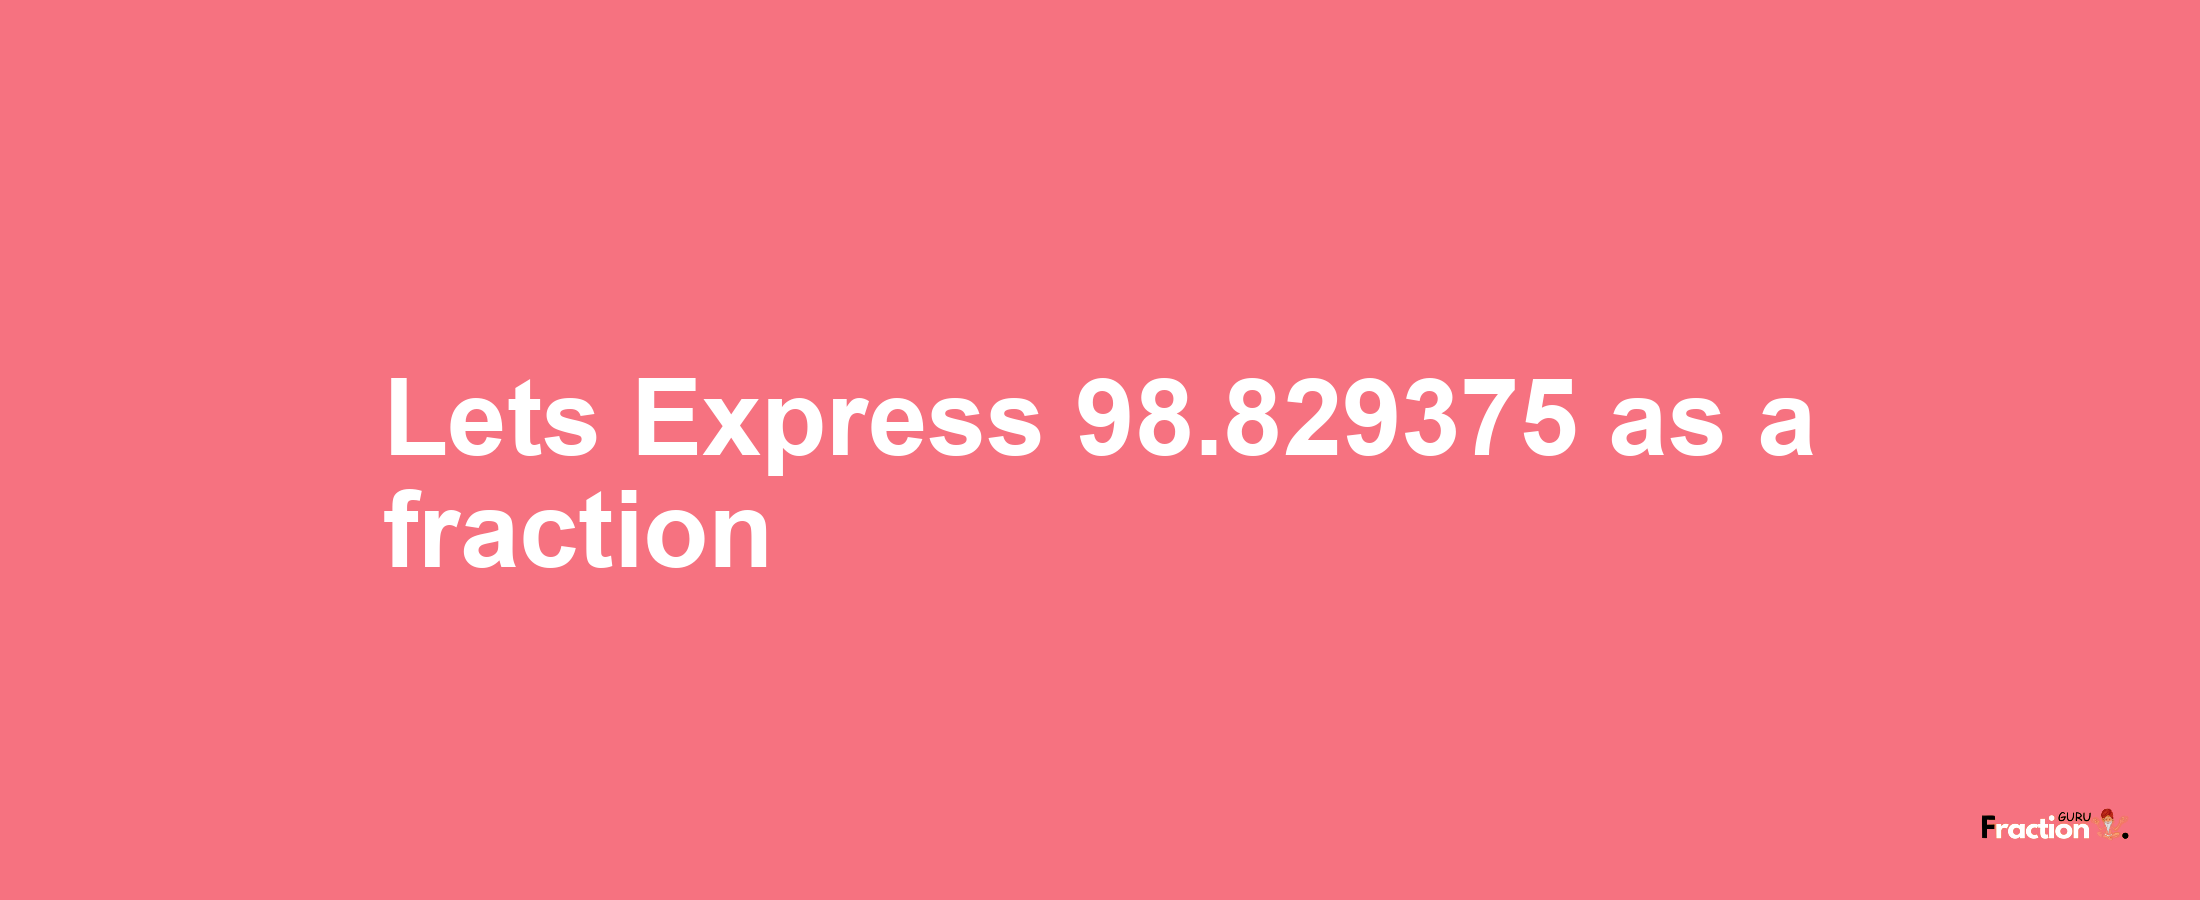 Lets Express 98.829375 as afraction